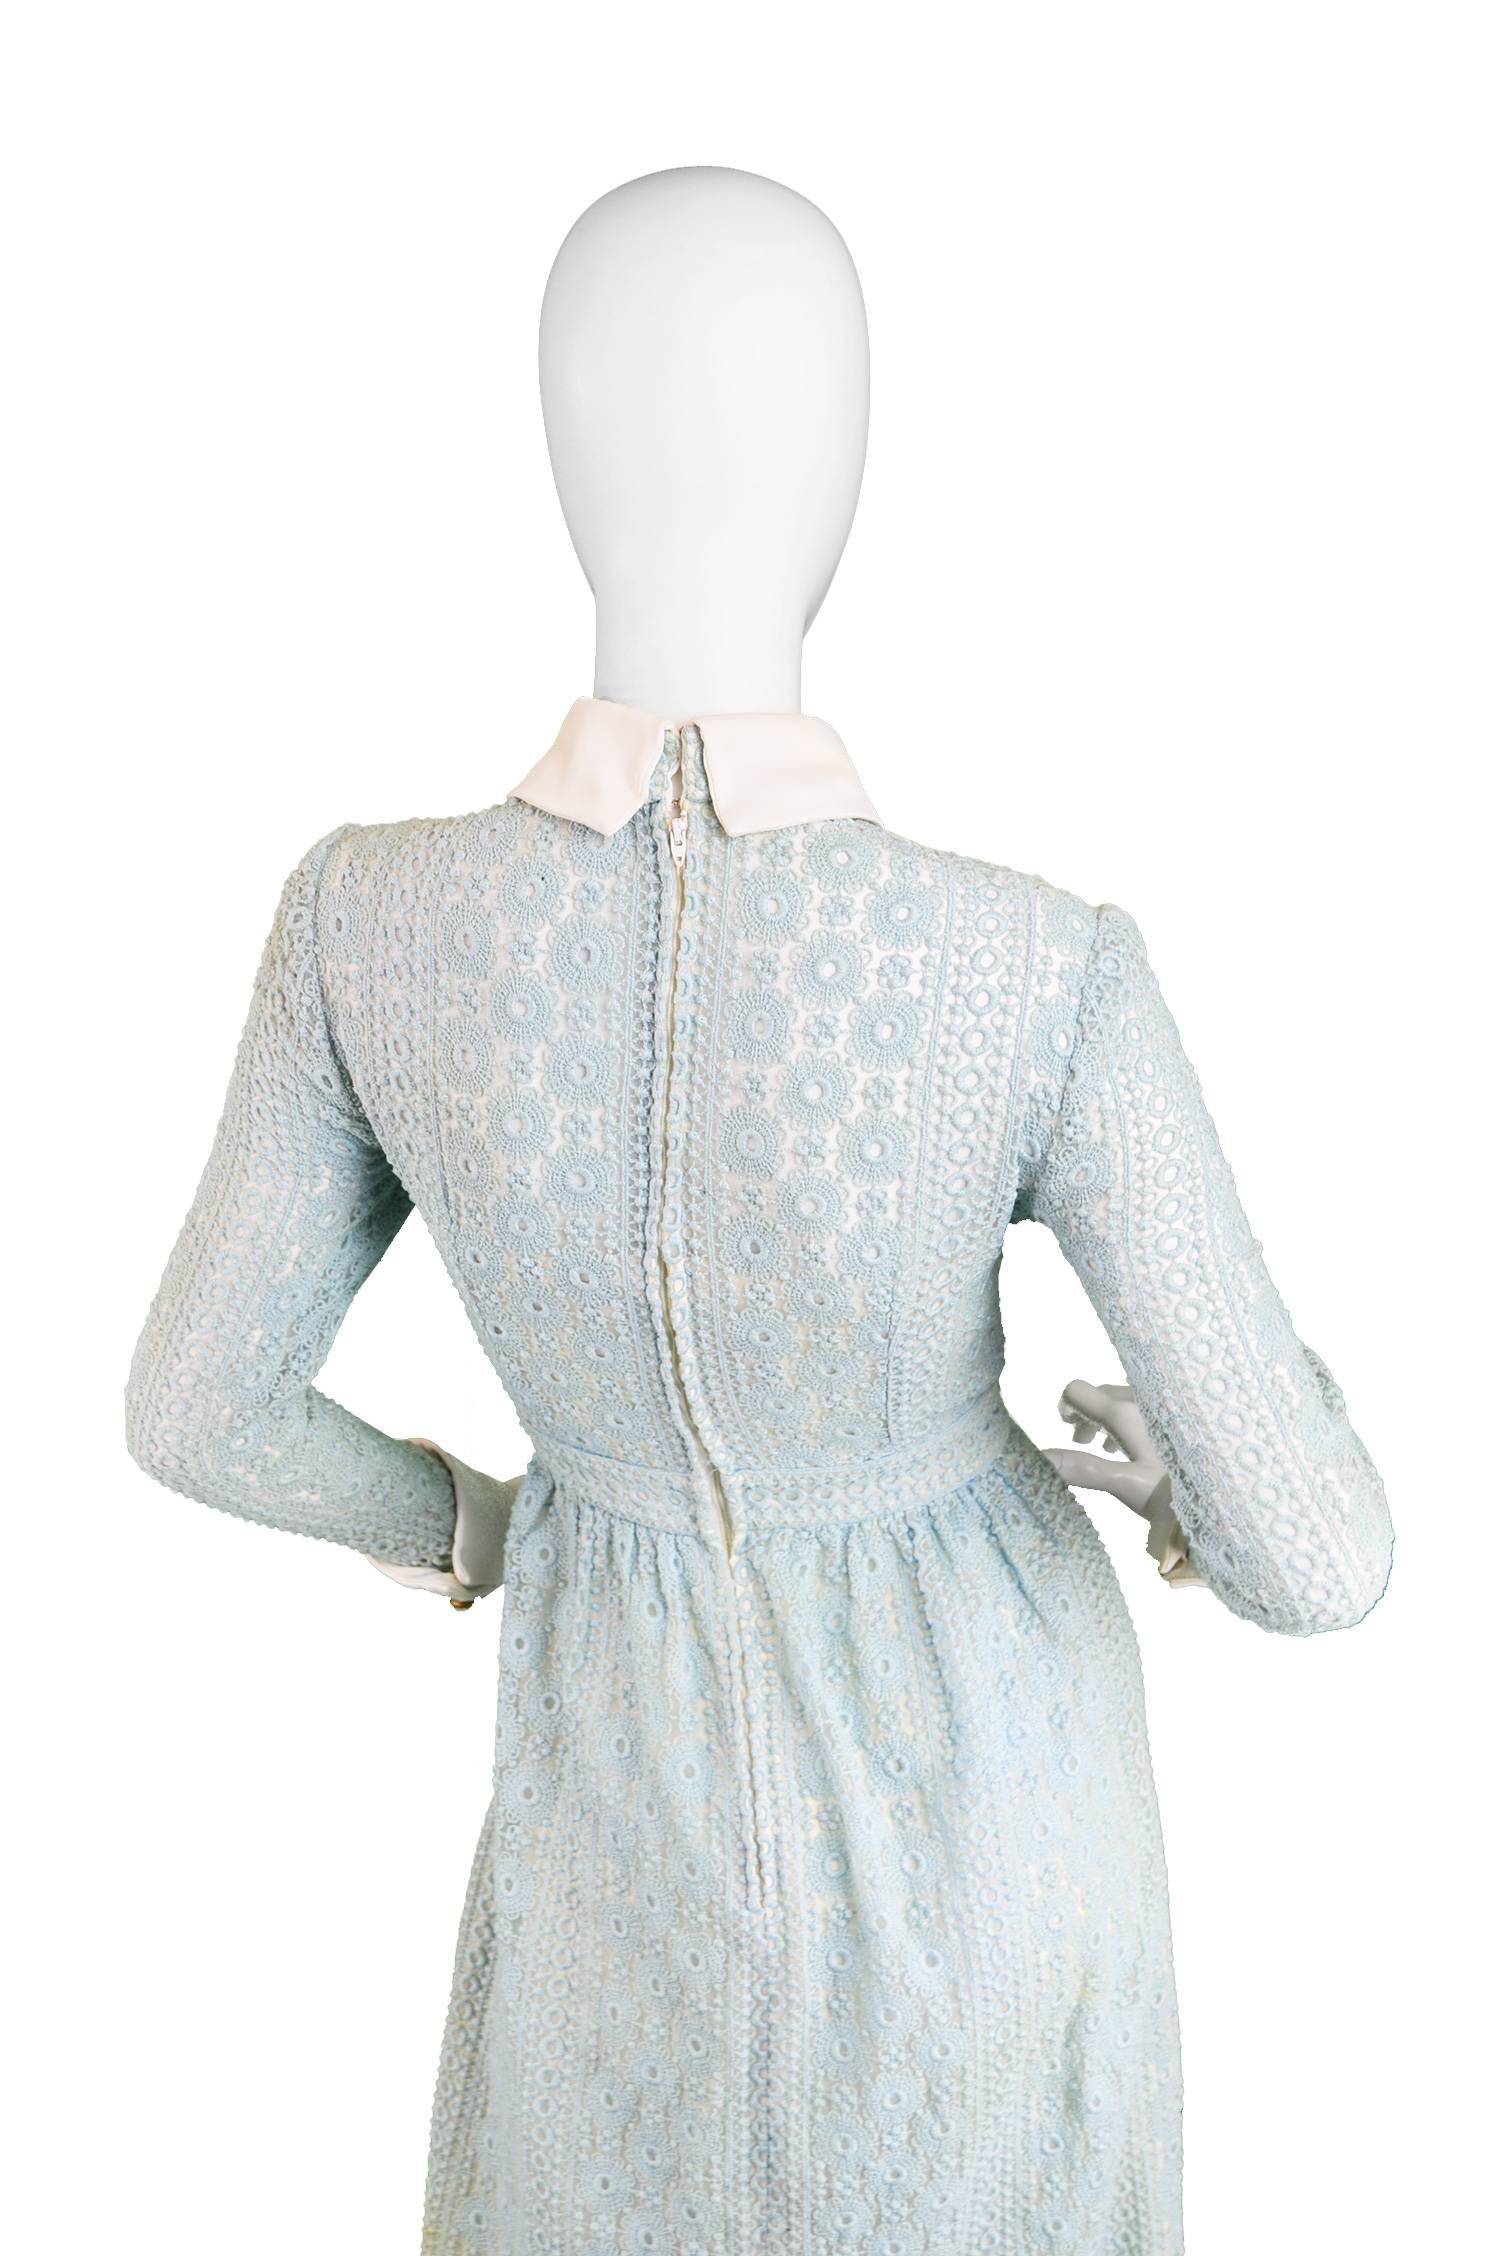 Victor Costa Pale Mint Broderie Anglaise & Organza Maxi Dress, 1970s For Sale 3